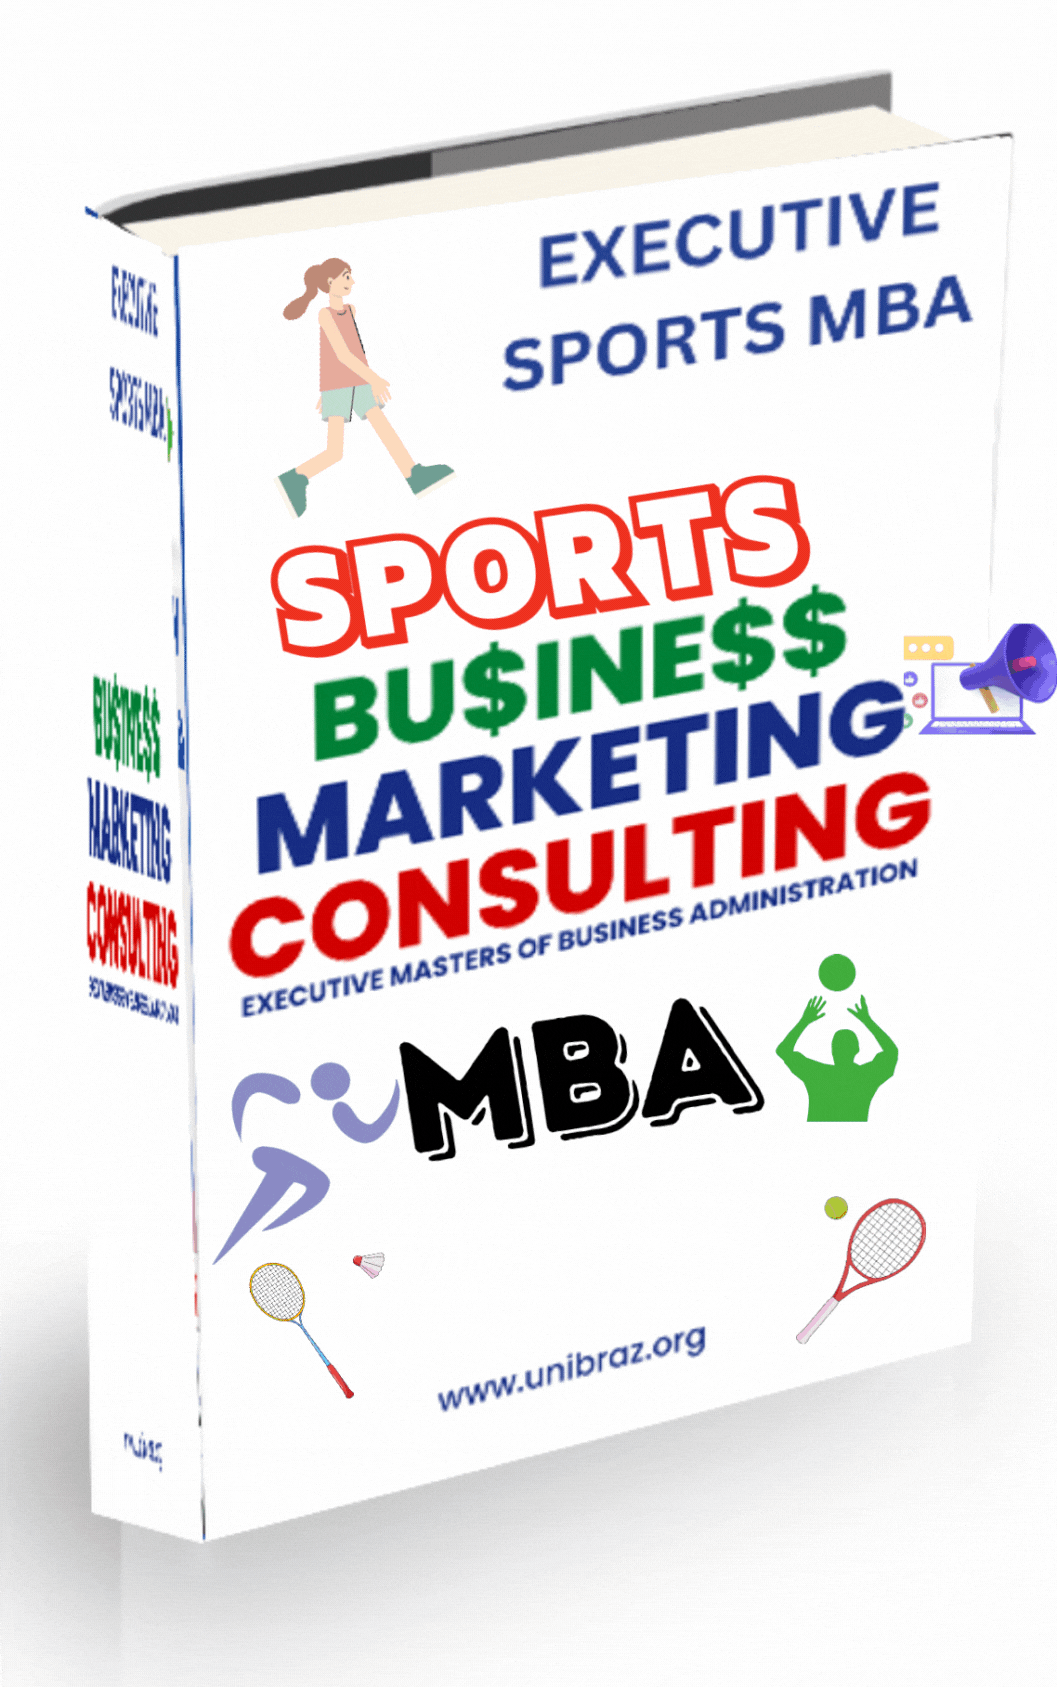 EXECUTIVE MASTERS OF BUSINESS ADMINISTRATION (EMBA) SPORTS BUSINESS I MARKETING AND CONSULTING